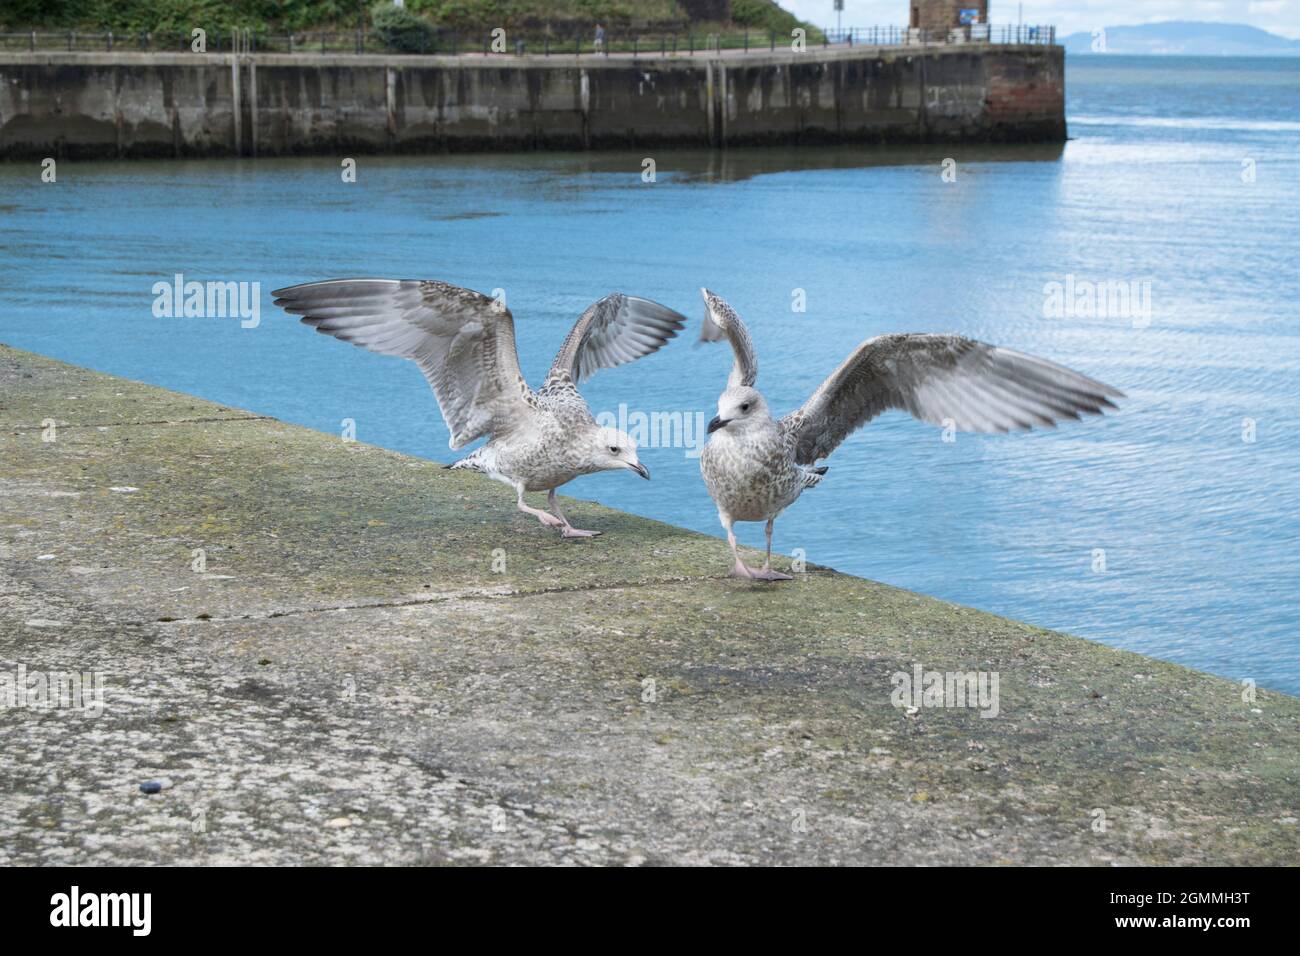 Two young seagulls flapping their wings on a harbor wall Stock Photo